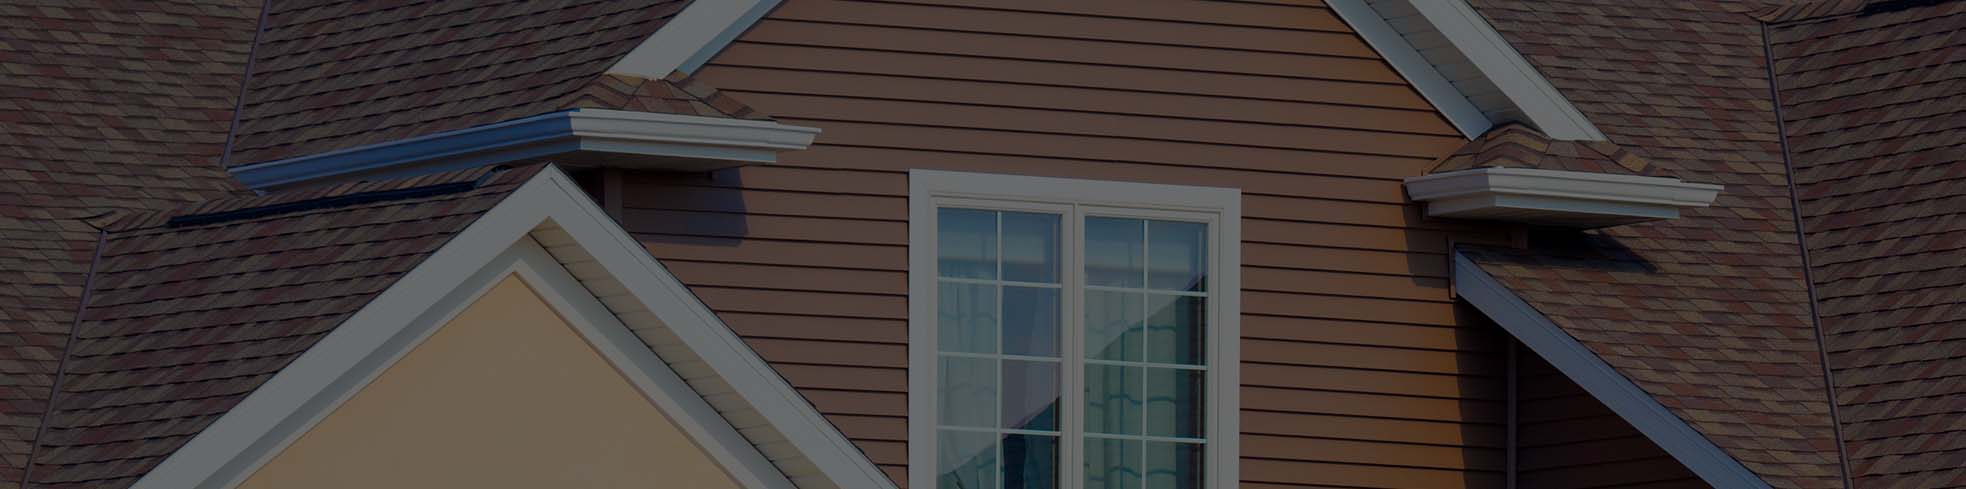 Vinyl siding makes Milwaukee homes stand out